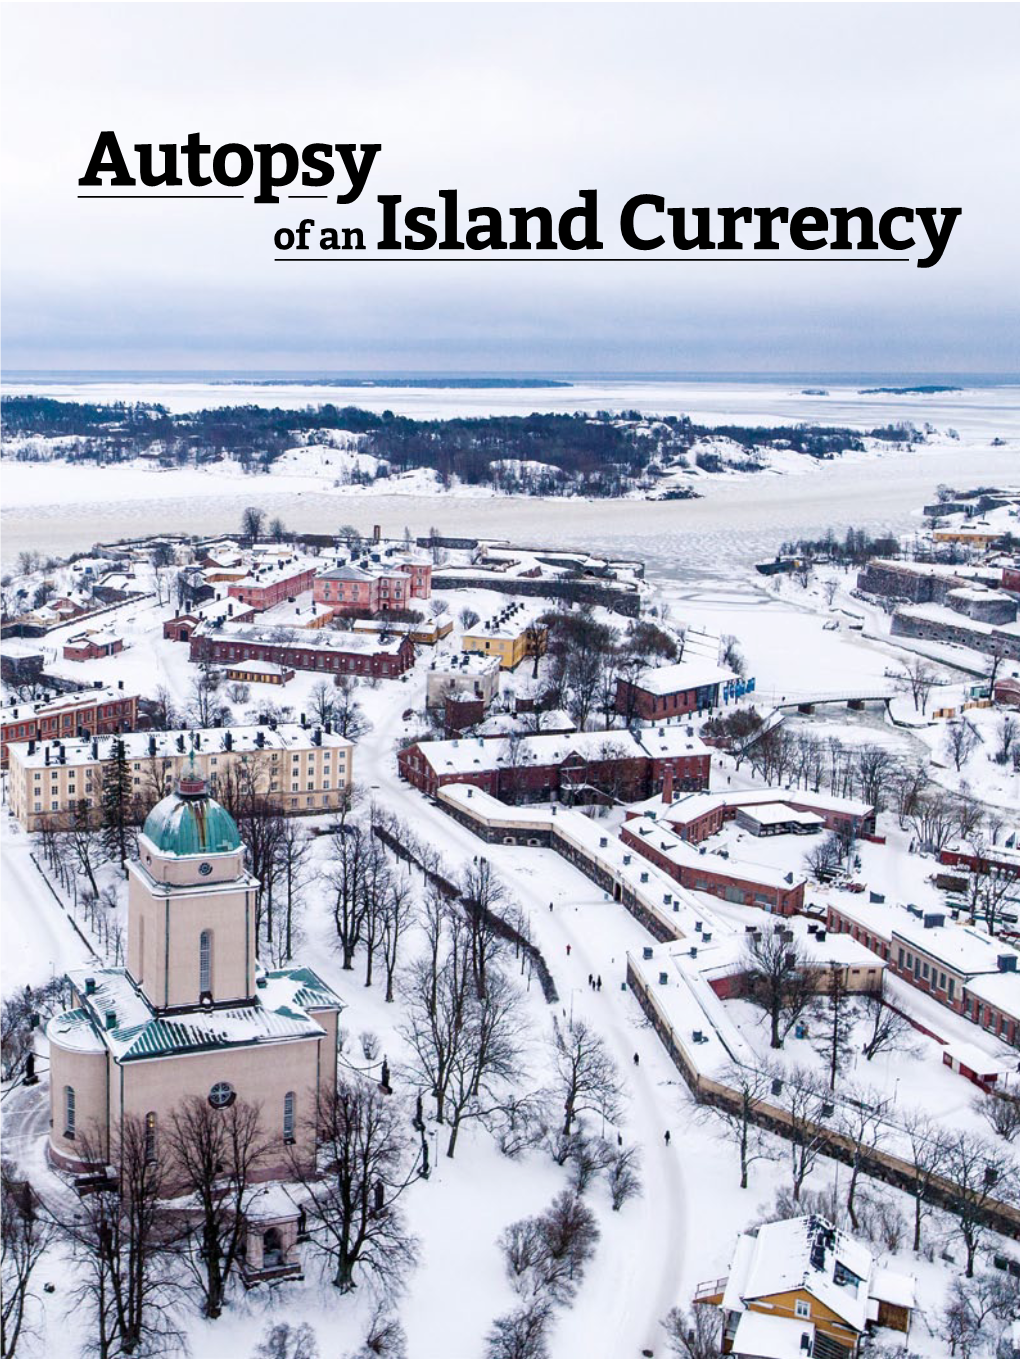 Autopsy of an Island Currency